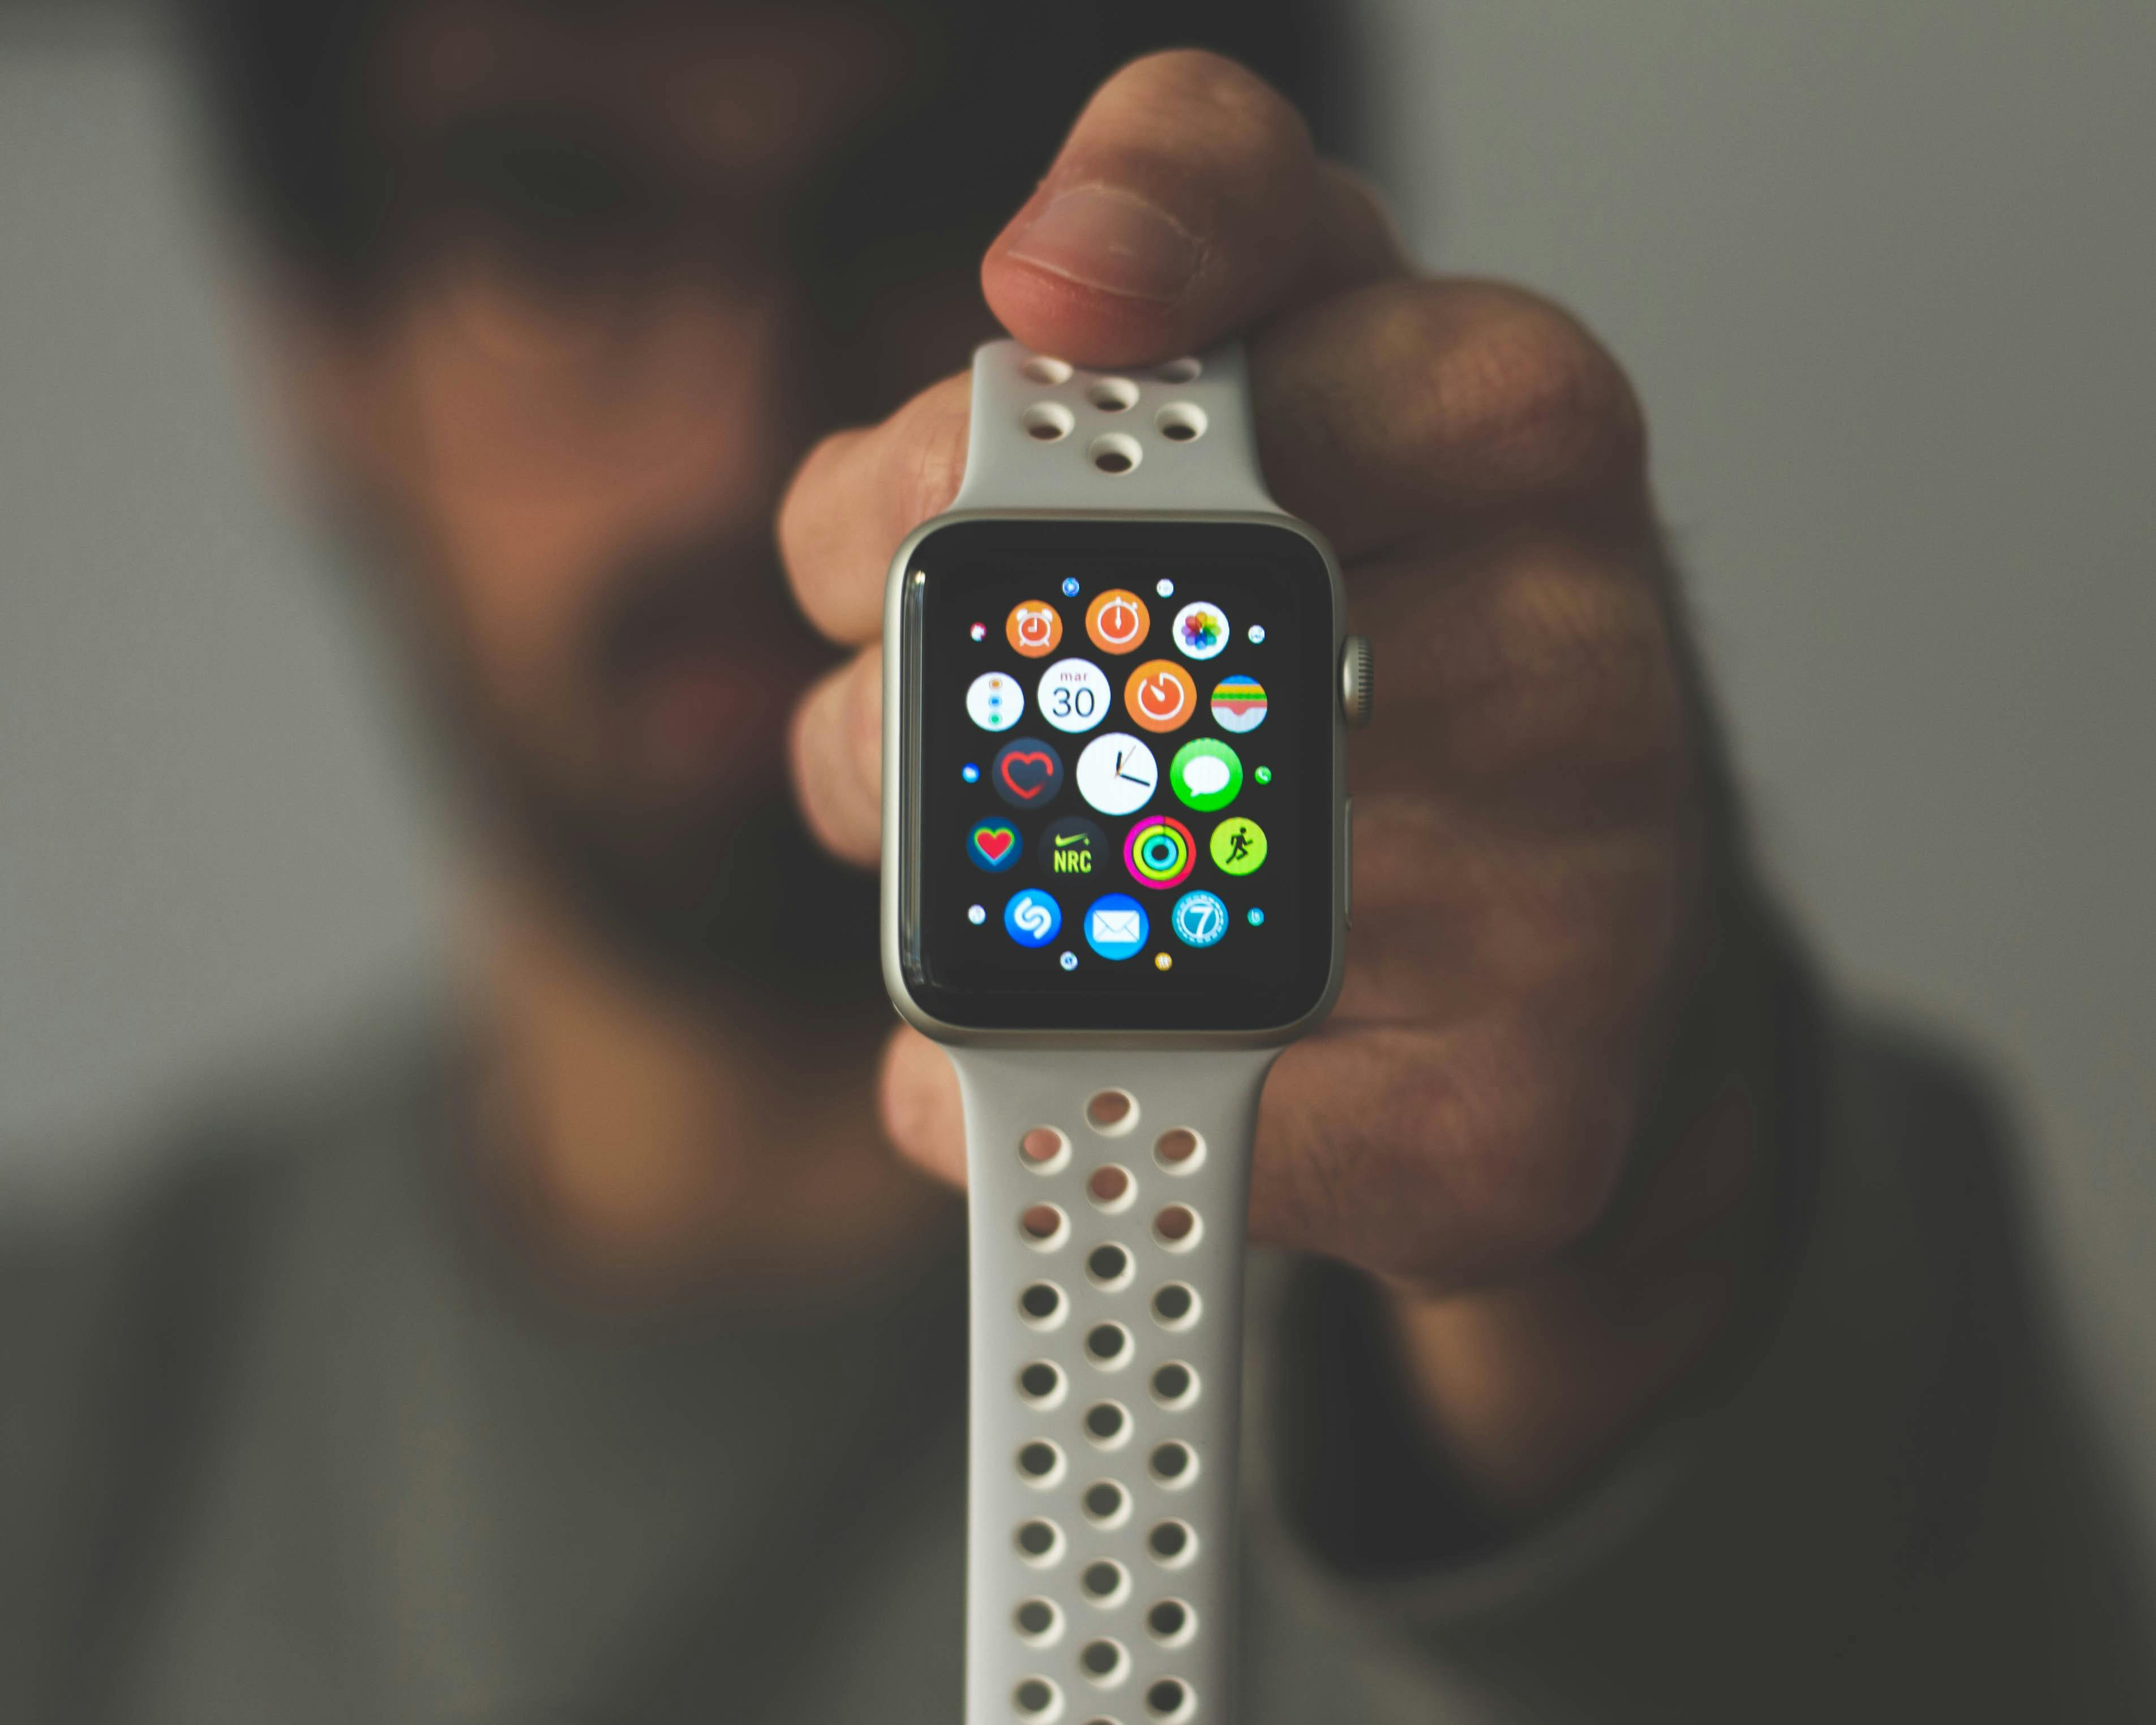 An Apple Watch Series 1, a versatile Smartwatch that is very useful for tracking sporting activity